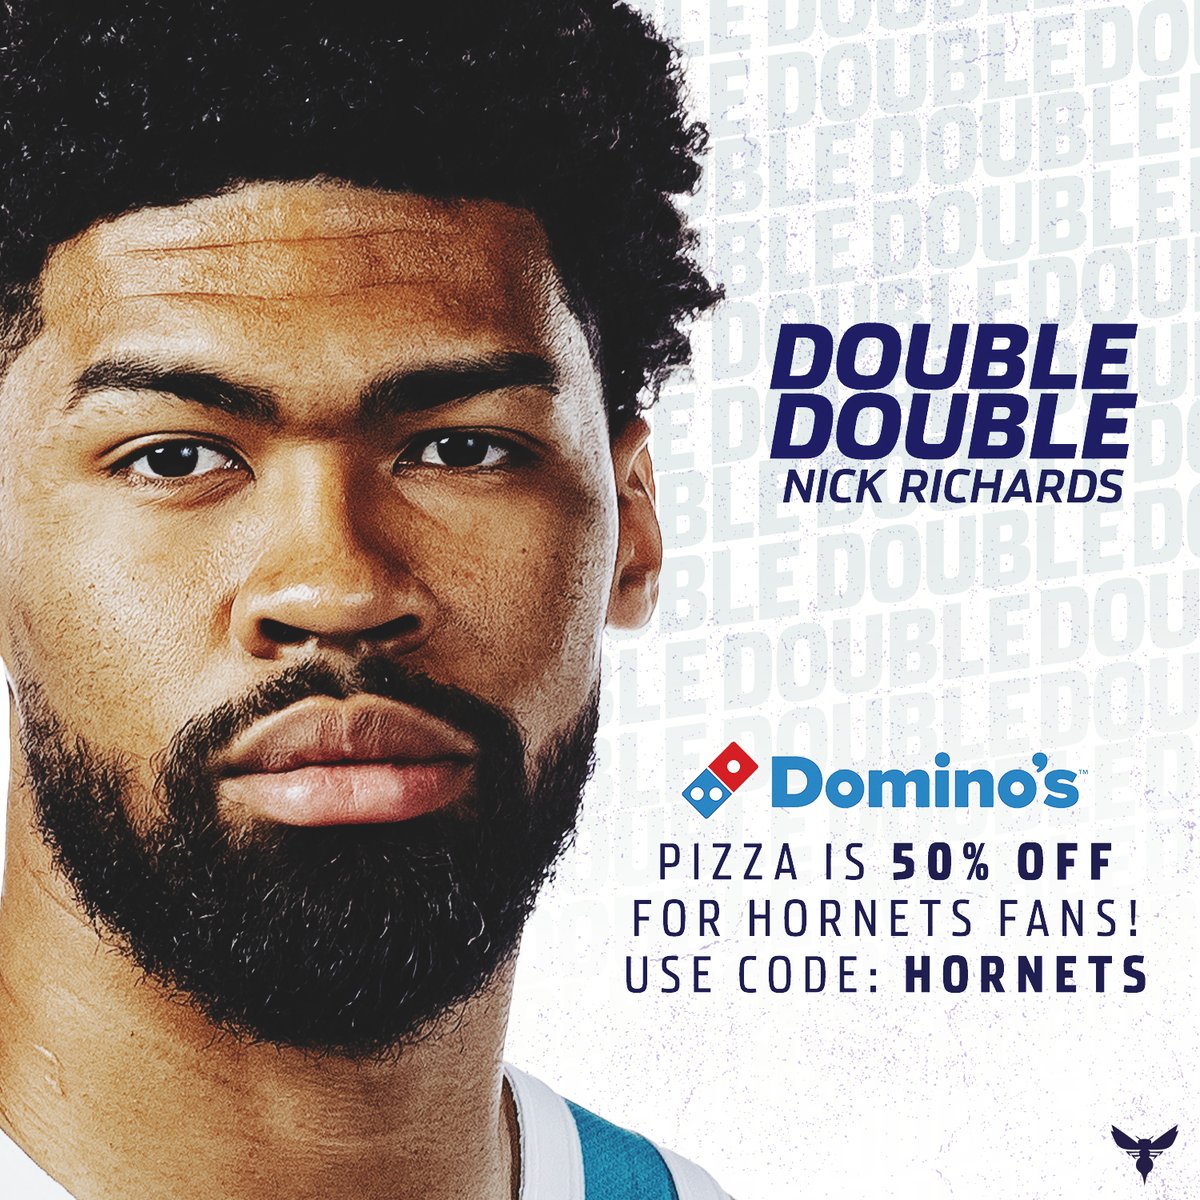 WHAT'S BETTER THAN DUBS AND PIZZA. Use code HORNETS for 50% off @yourlocaldomino pizza tomorrow!!! Available throughout the greater Charlotte area, Hickory and Chapel Hill. Not available at all locations.